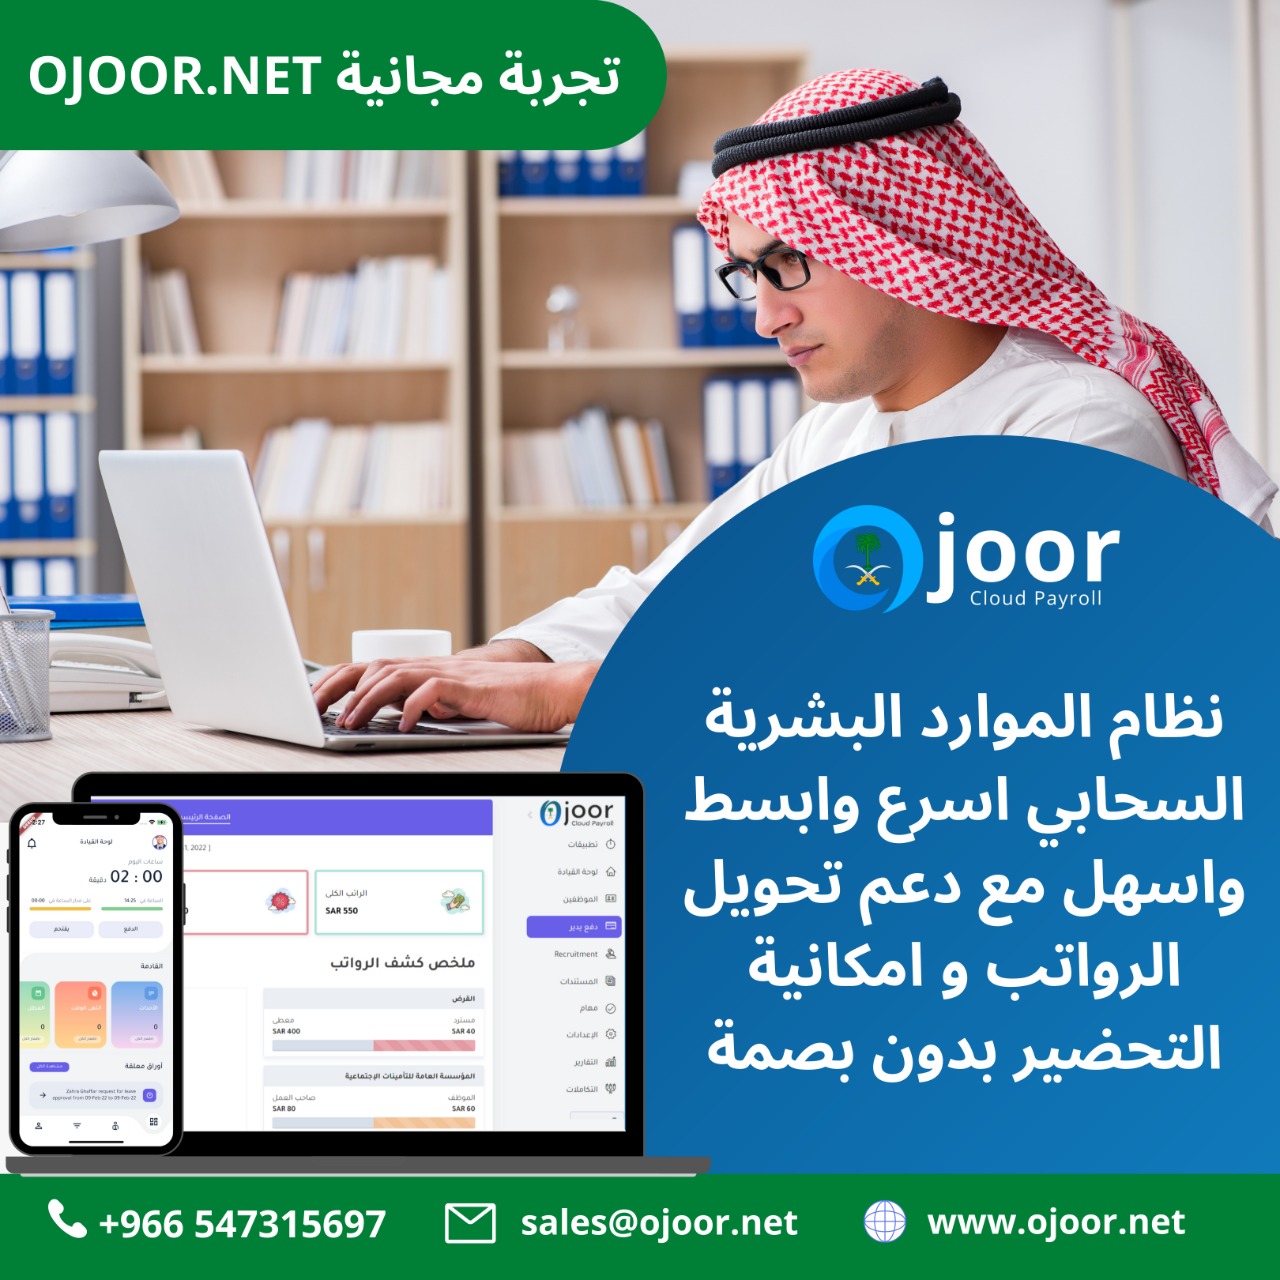 Which ways use to Improve Payroll Process via Payroll System in Saudi?